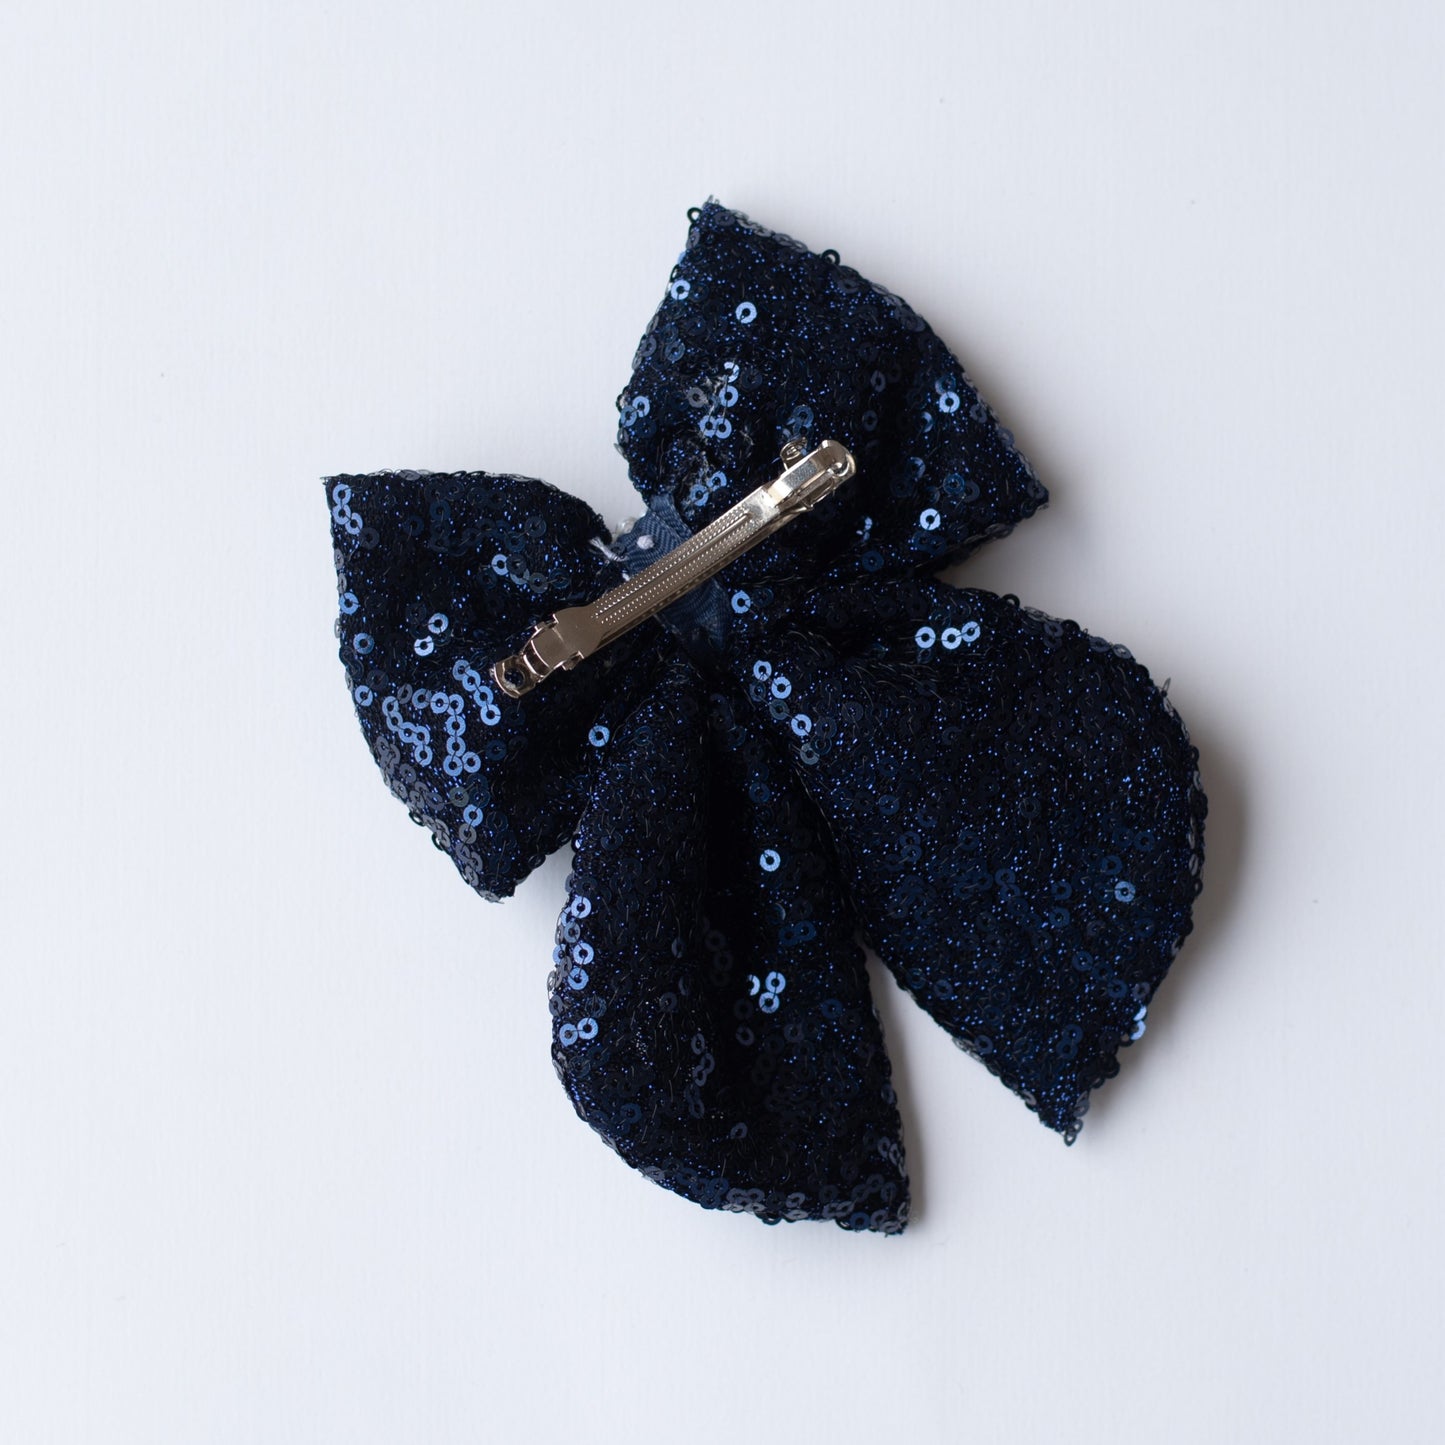 Fancy party sequins big bow with embellished pearls on barette clip - Navy Blue